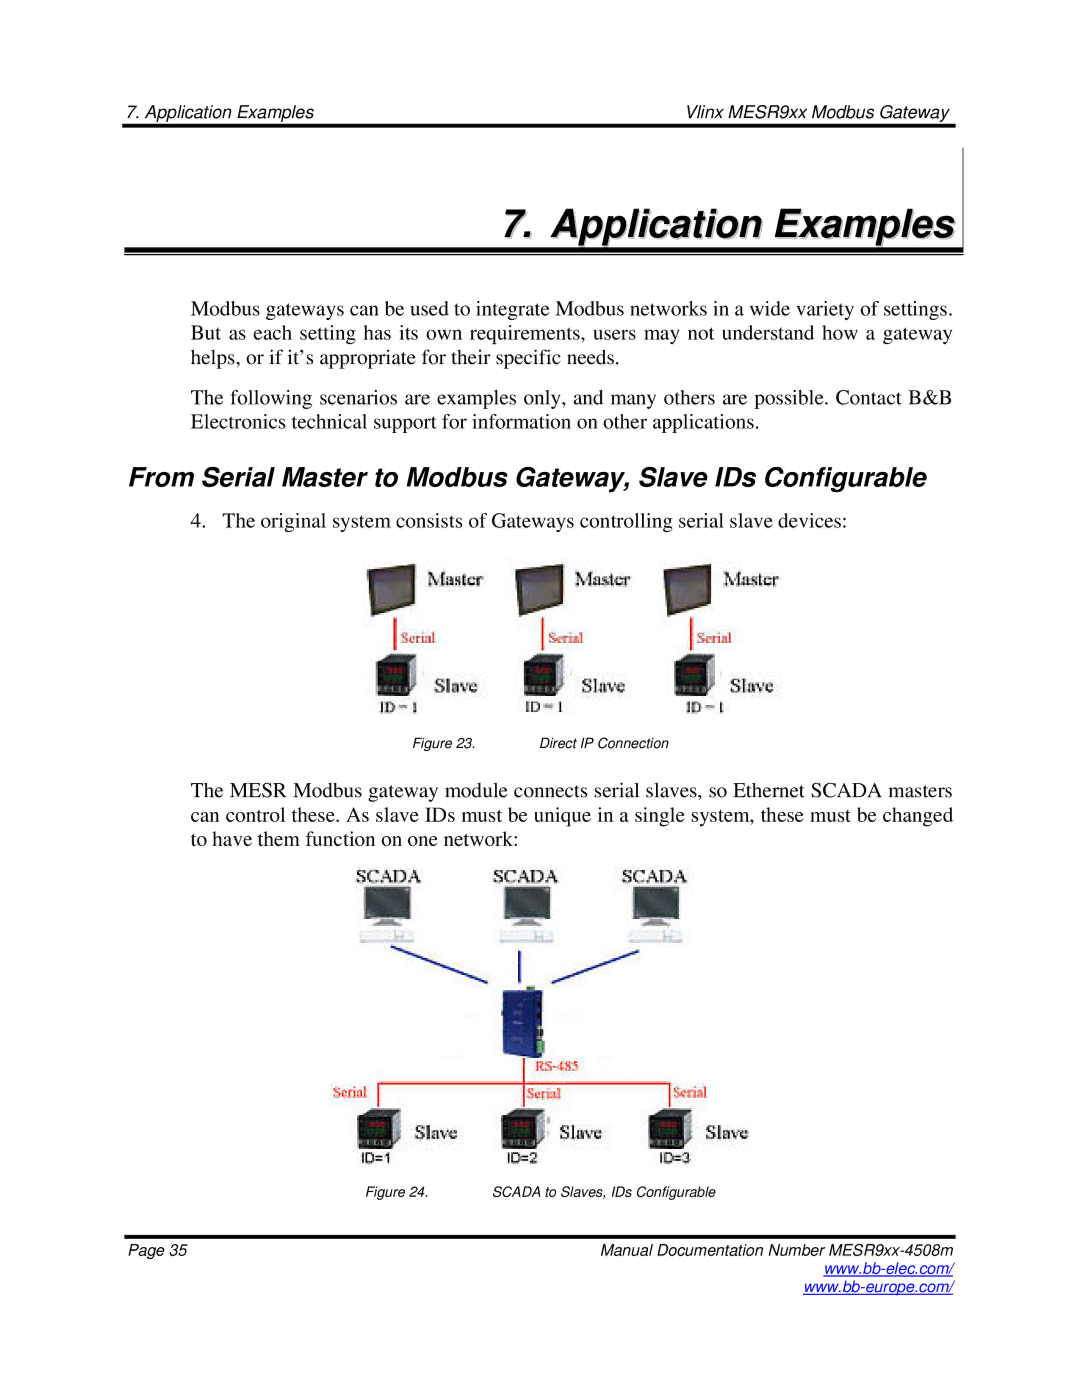 B&B Electronics MESR9xx manual Application Examples, From Serial Master to Modbus Gateway, Slave IDs Configurable 